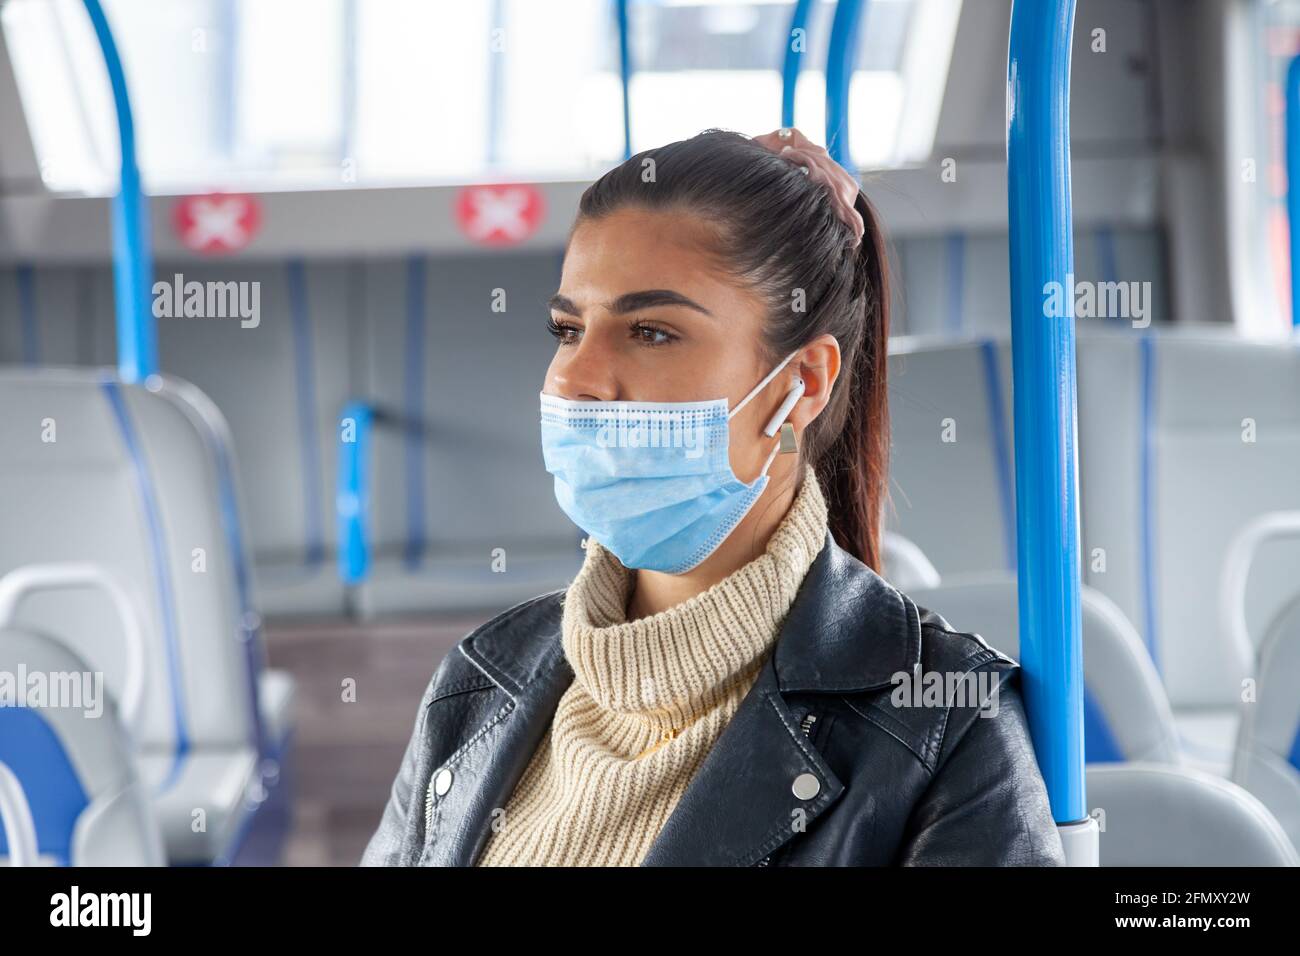 A woman travelling on public transport wearing her face mask under her nose Stock Photo